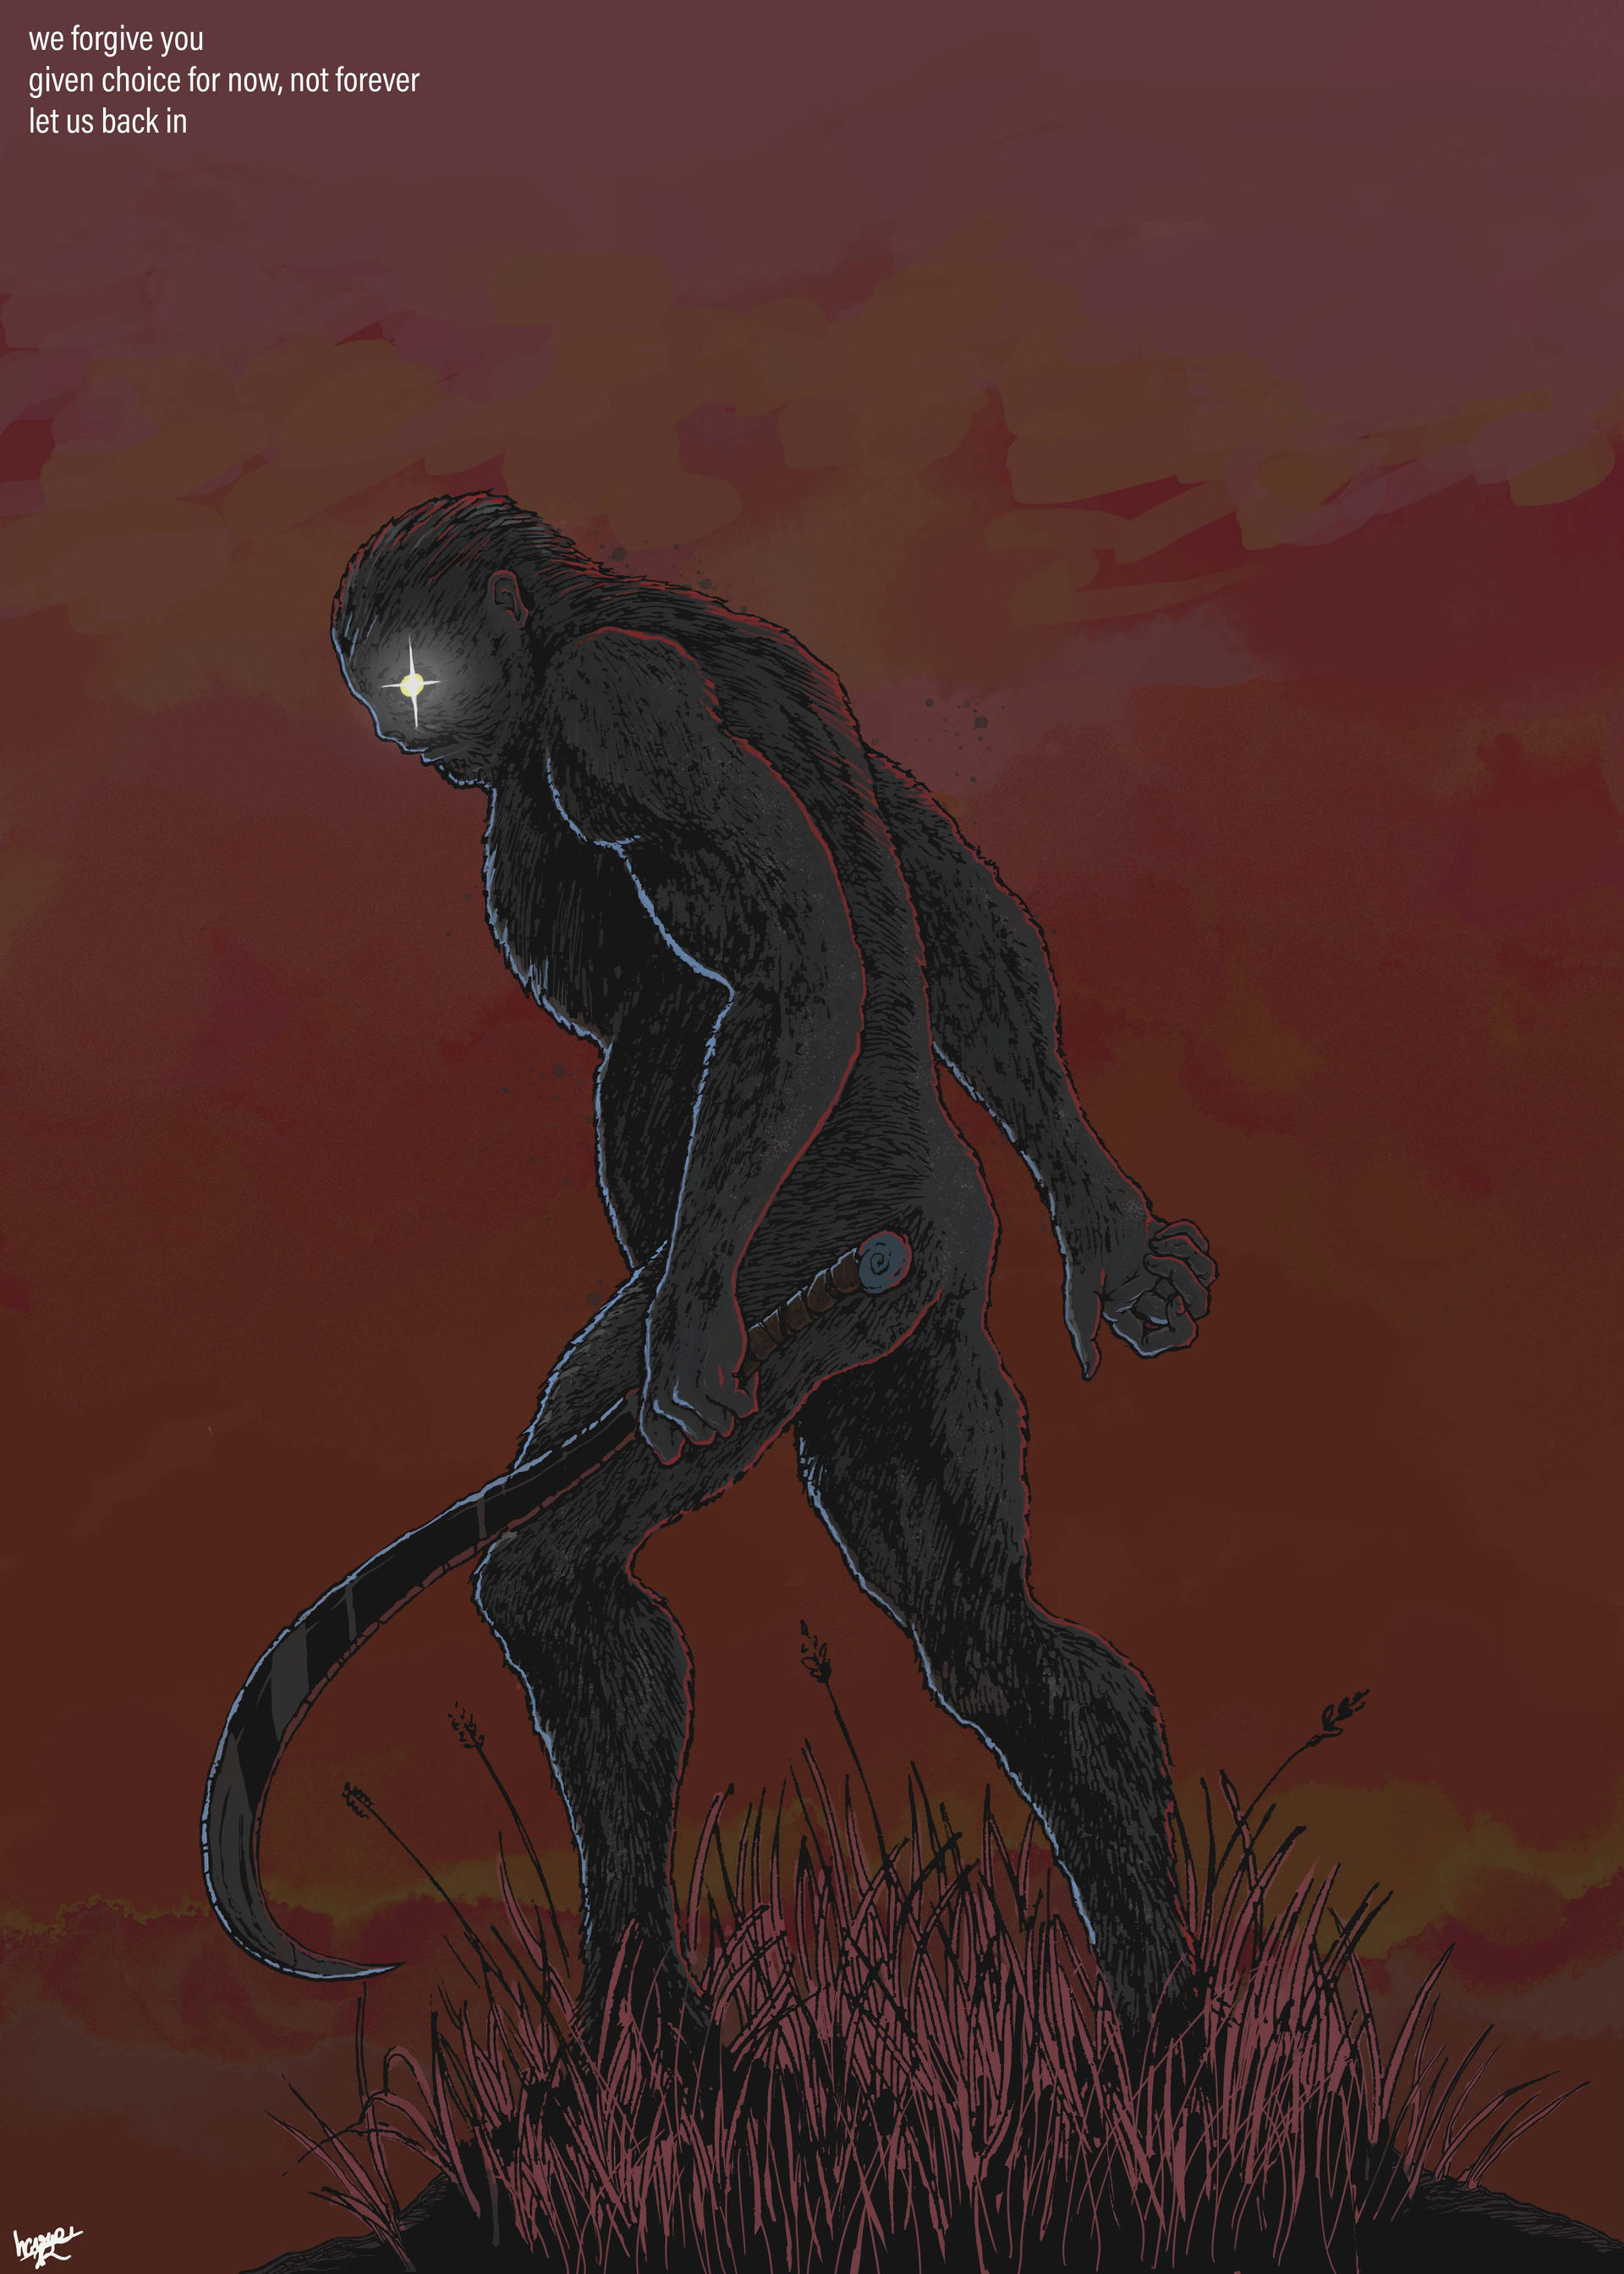 SCP-1000 - Bigfoot : Object Class - Keter : Humanoid SCP 